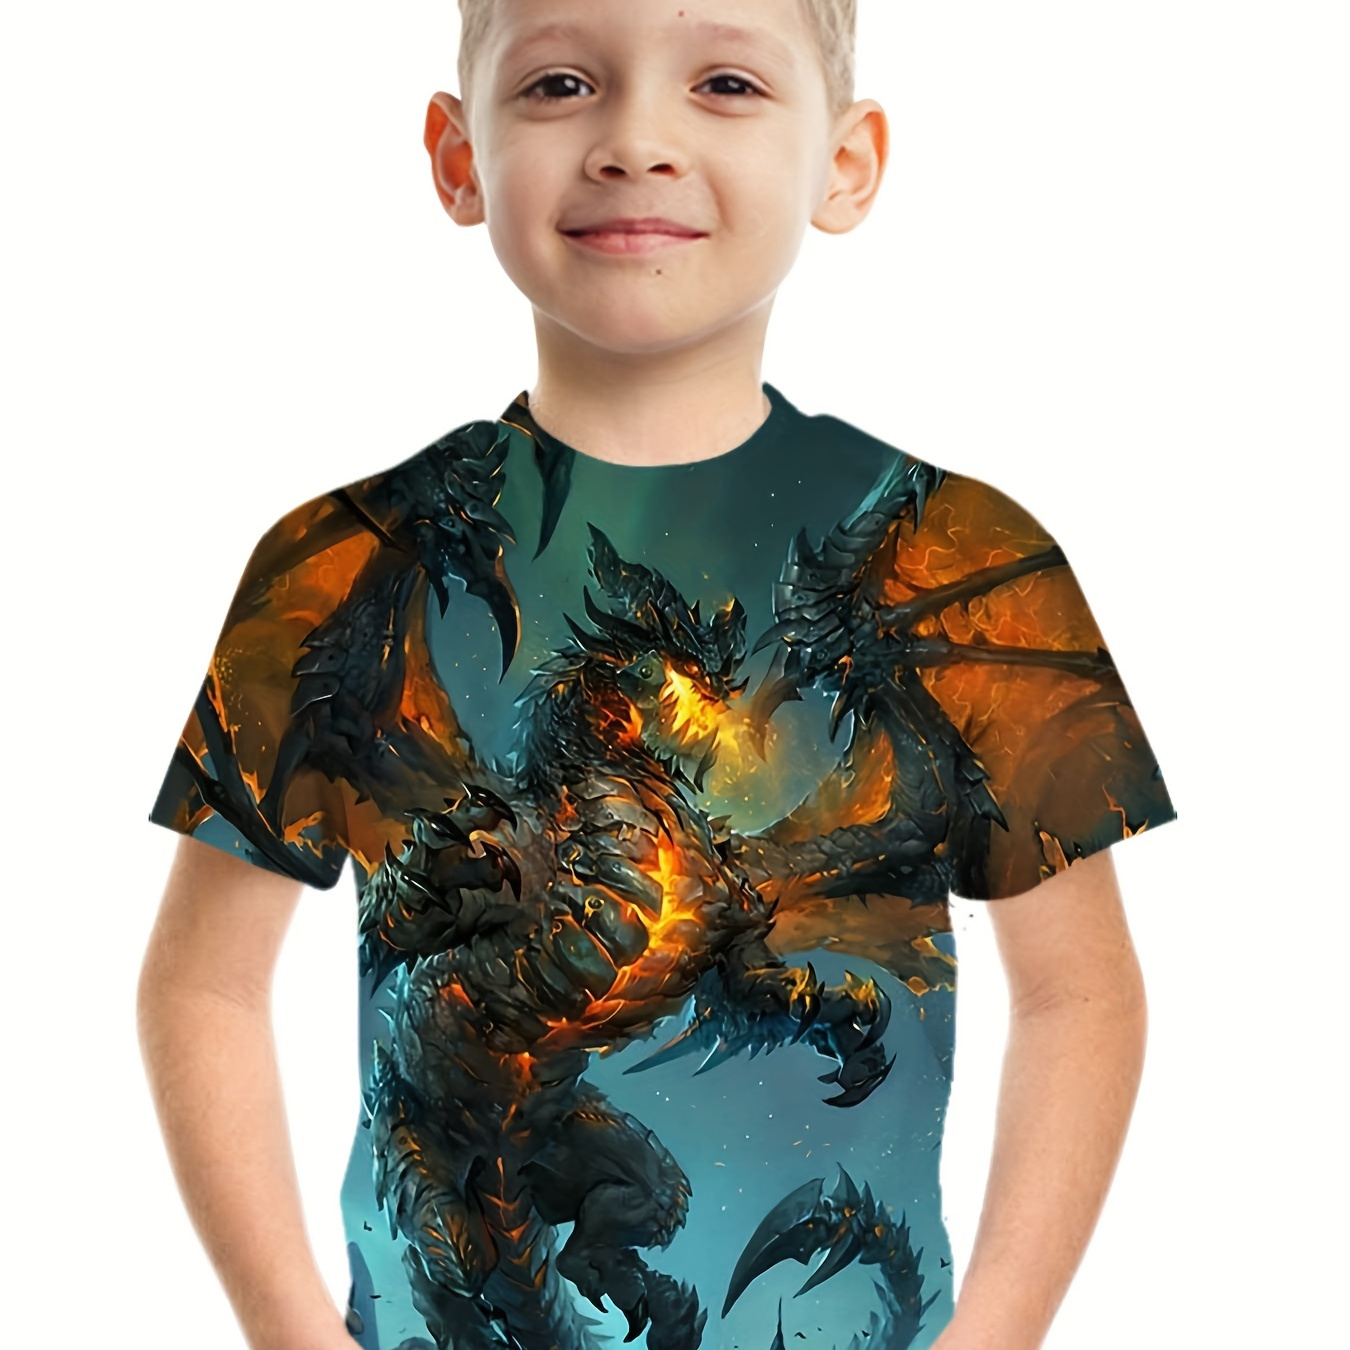 

Cool Dragon 3d Print Boys Creative T-shirt, Casual Lightweight Comfy Short Sleeve Tee Tops, Kids Clothings For Summer